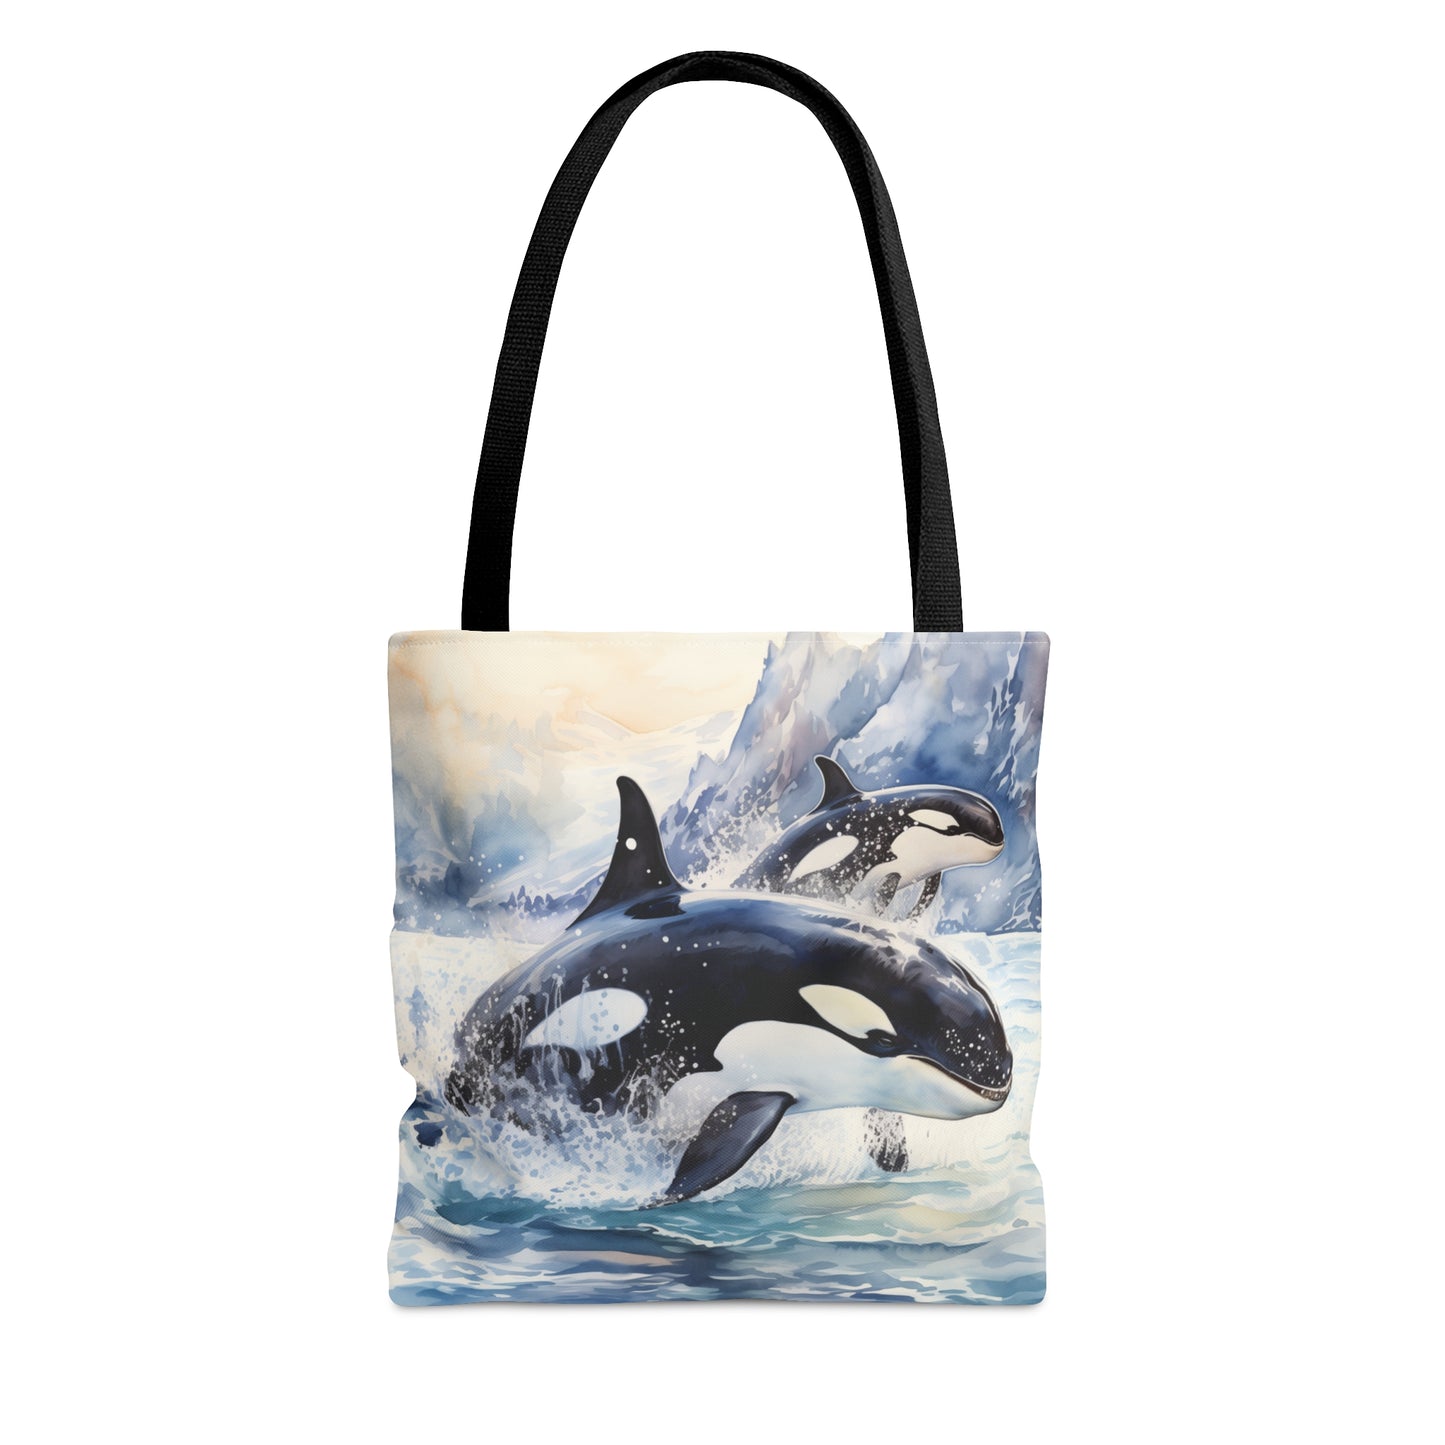 Tote Bag with Majestic Orcas, Perfect for Ocean Enthusiasts, Arctic Waters Adventure Bag, Travel Bag